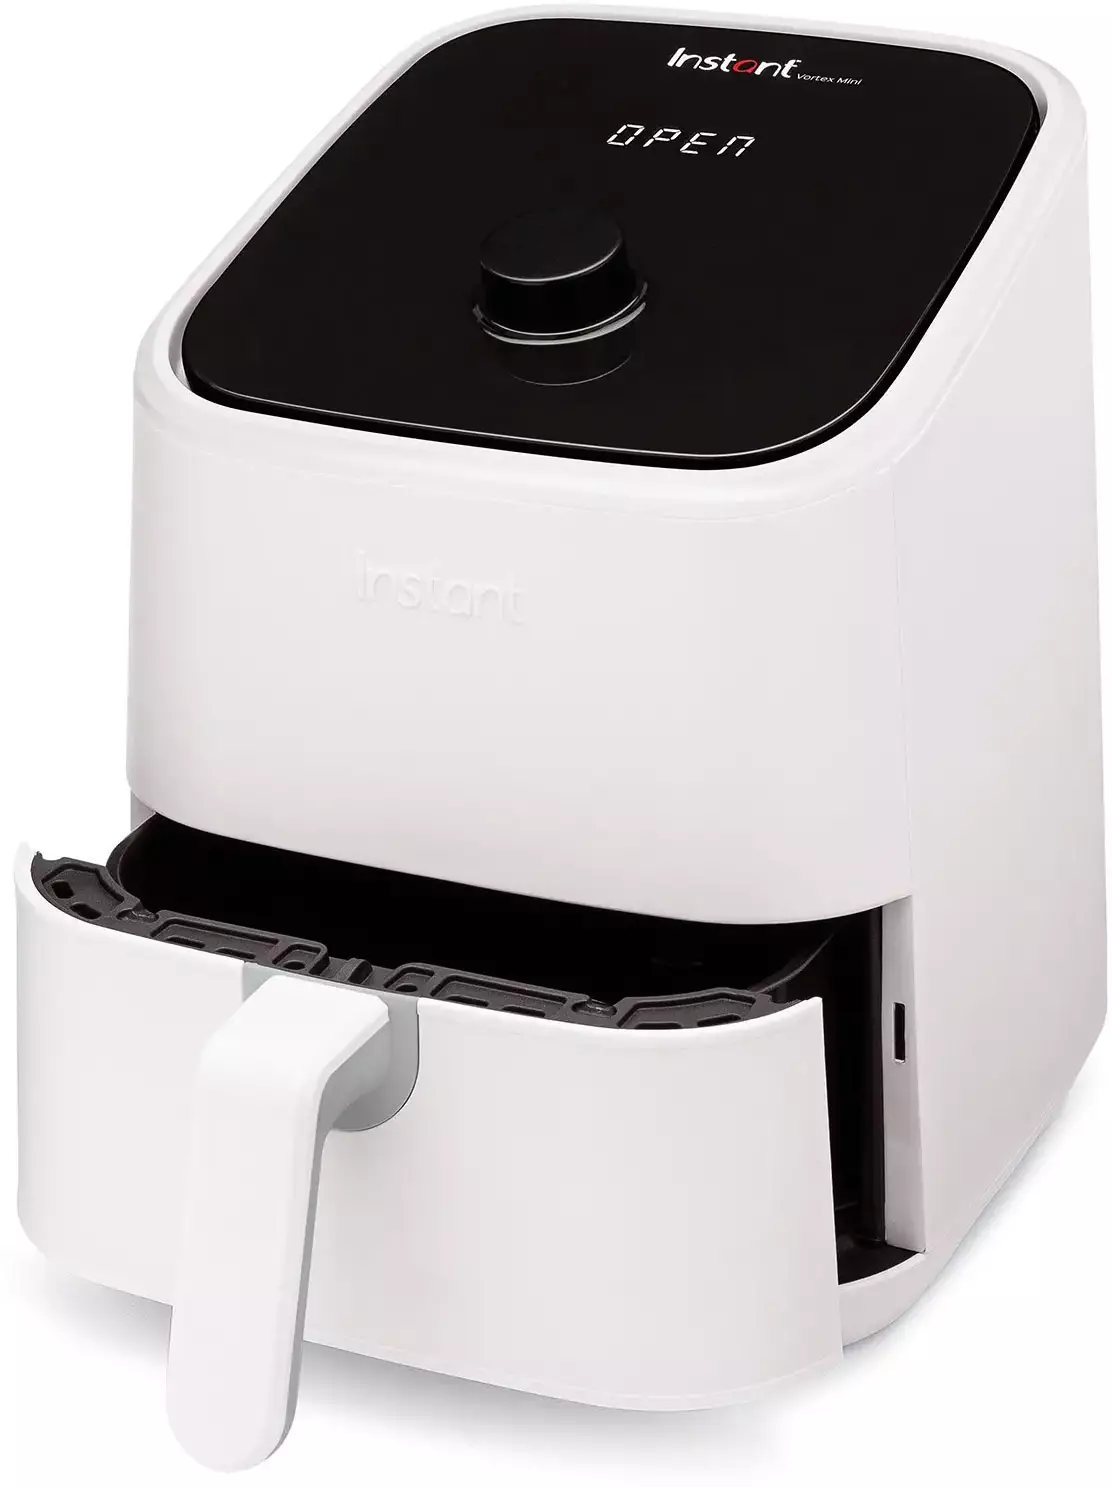 Instant Vortex Plus or Pro (Beginners Guide), Instant Air Fryer